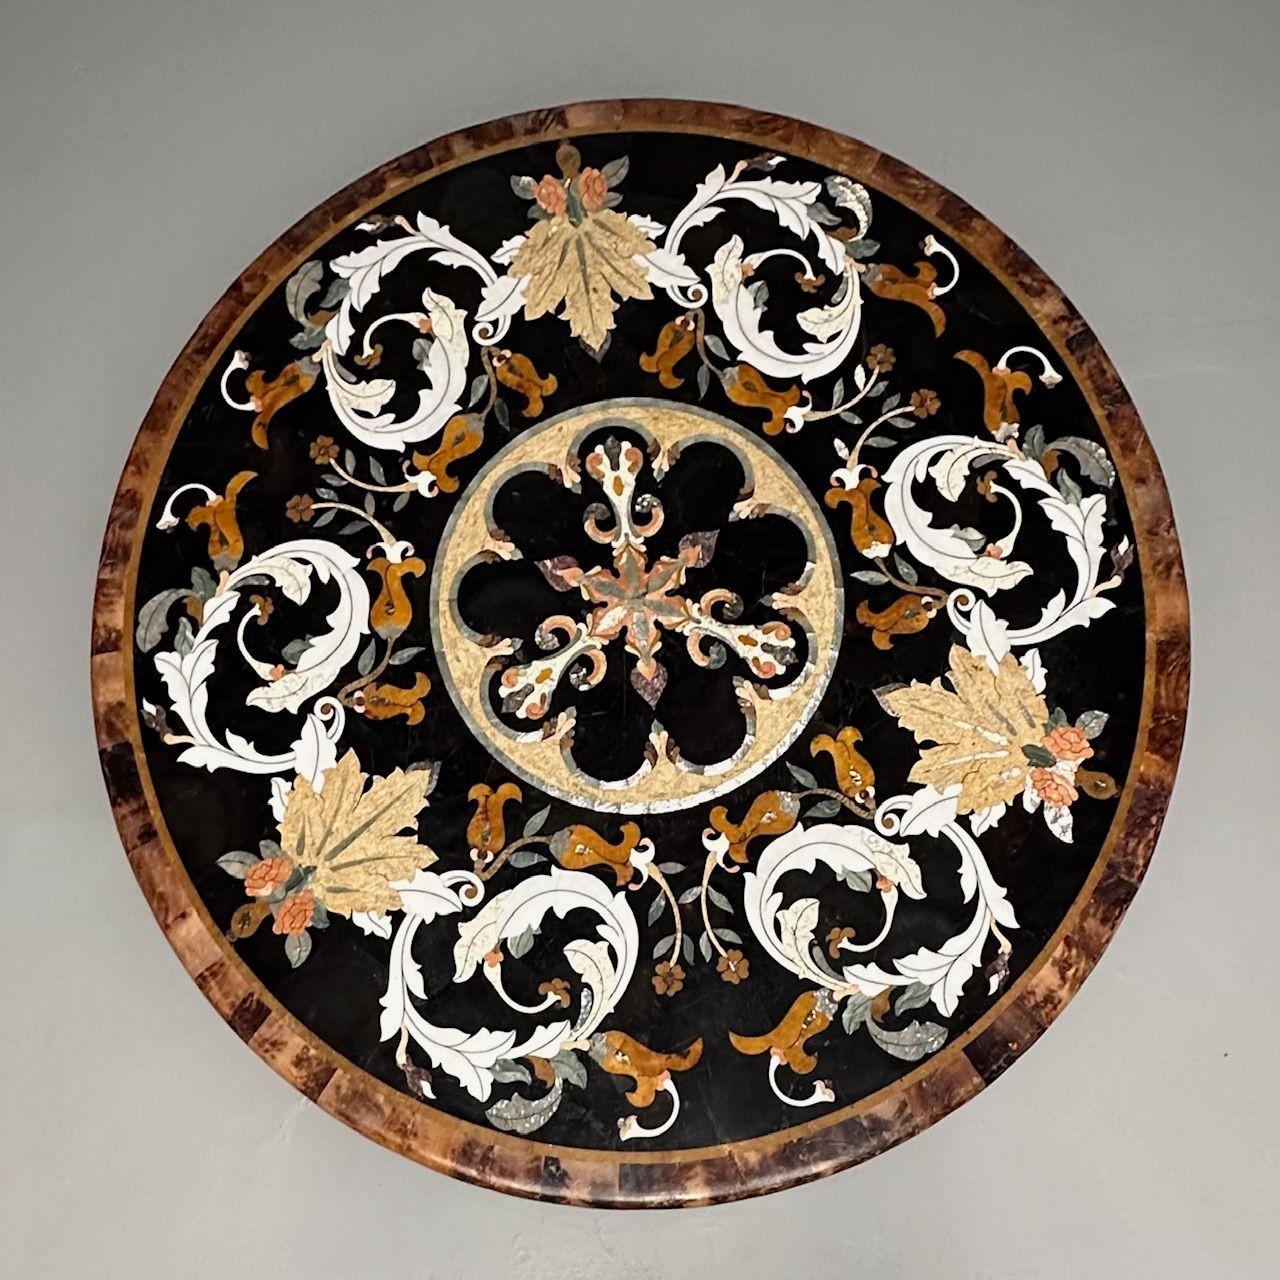 Pietra Dura, Italian Mid-Century Modern Round Table Top, Marble, Mother of Pearl

Round marble table top with intricate micro-mosaic details. Finely detailed for either a dining, card or center table for a foyer. The entire top is made of marble